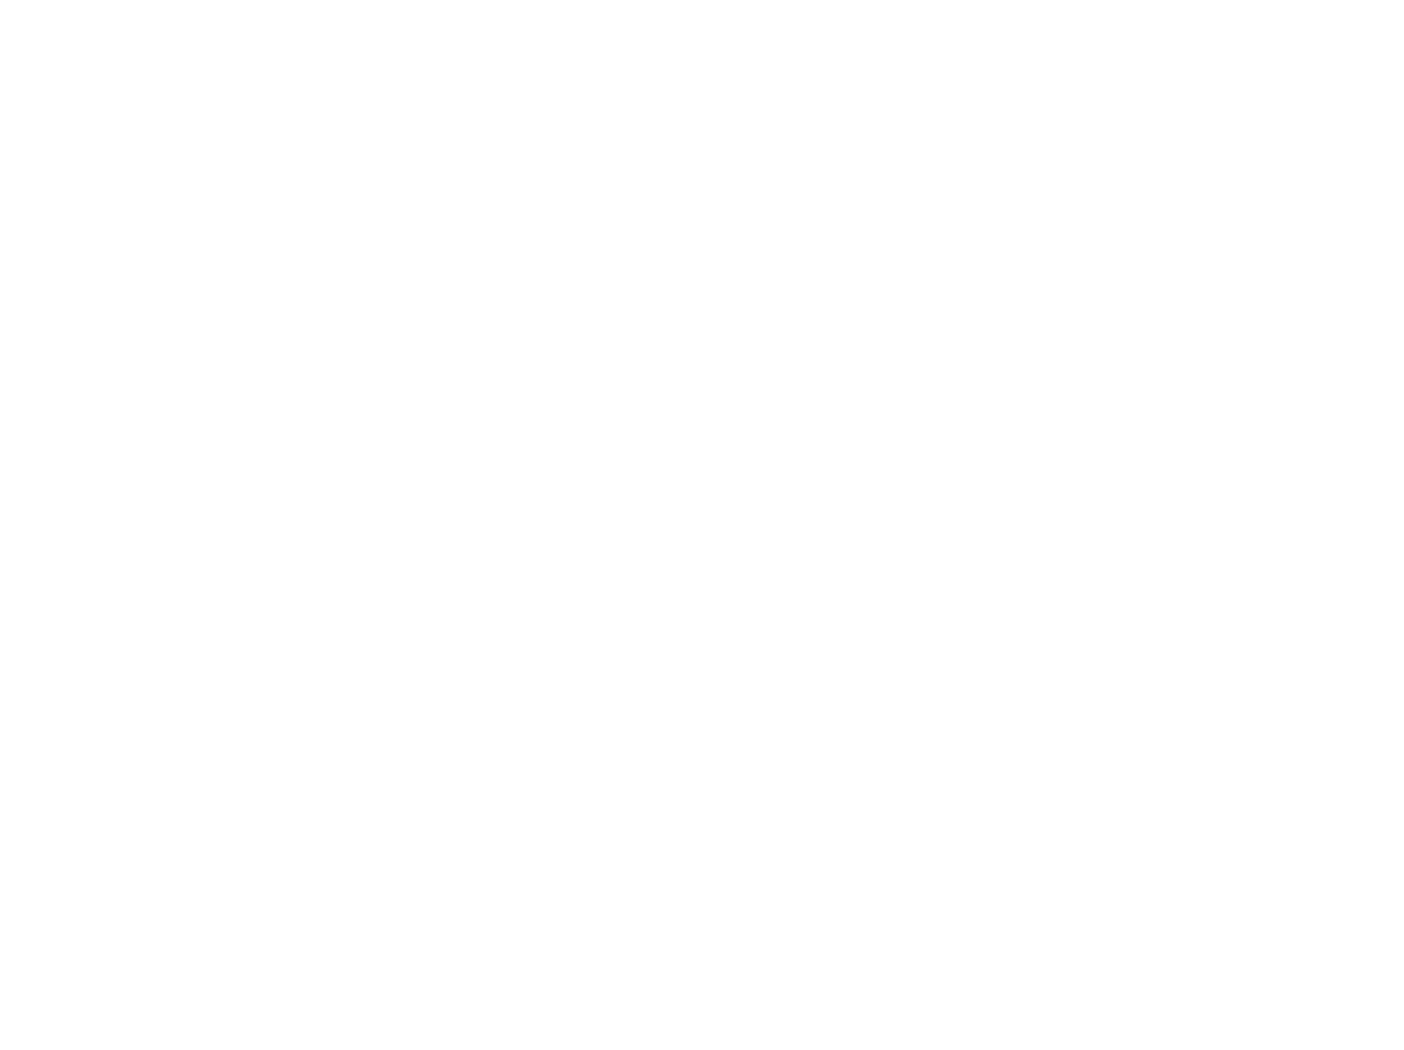 Financial Integrity image